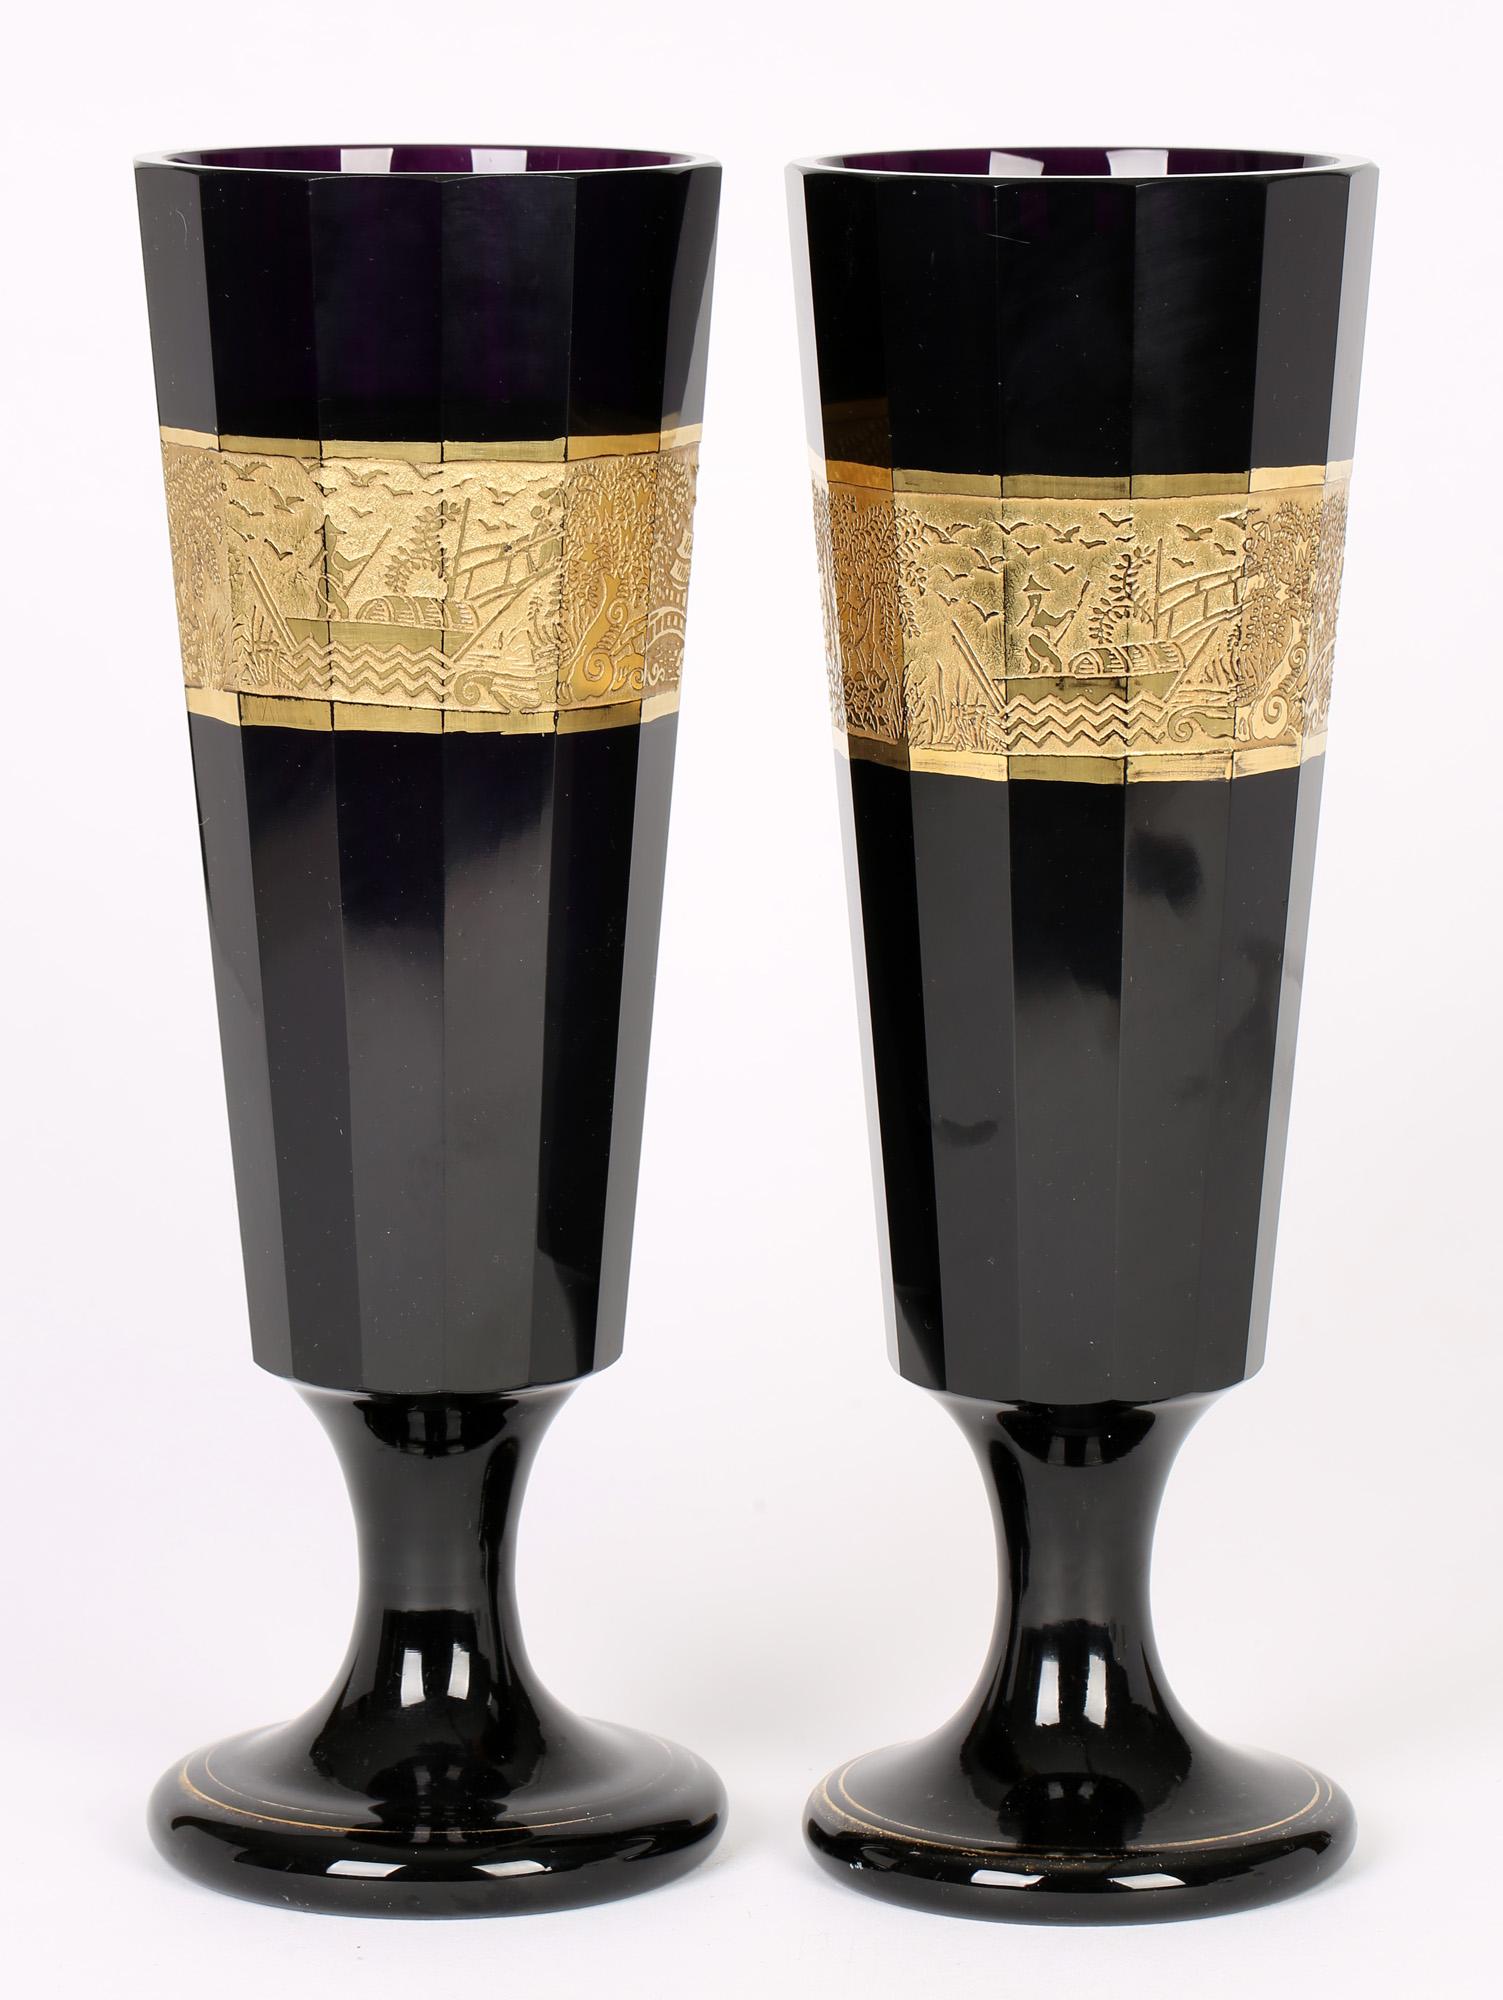 An exceptional and large pair Moser amethyst glass vases with gilded chinoiserie patterns dating from around 1910. These tall glass vases Stand on a wide rounded solid pedestal foot with a short narrow stem and with a tall slender body with multiple